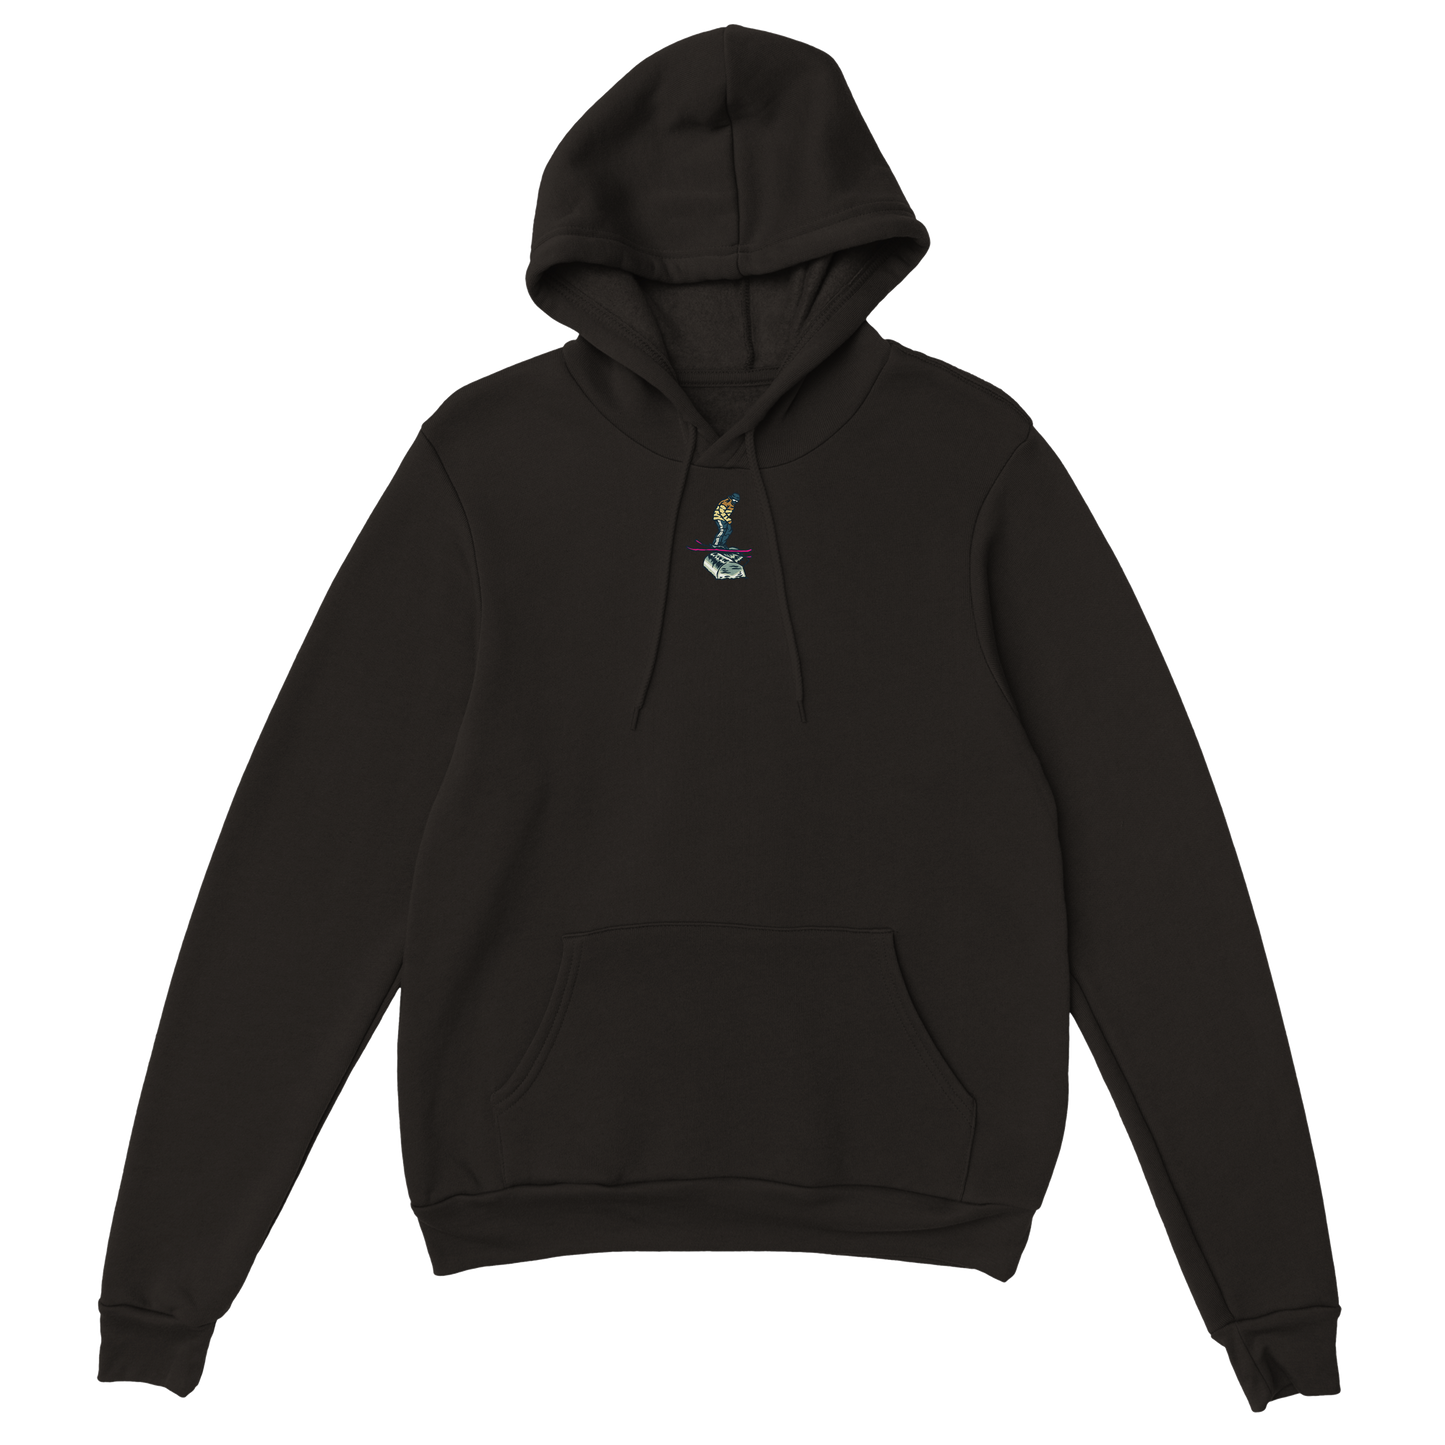 freestyle skiing Hoodie Do it or not, but never try.